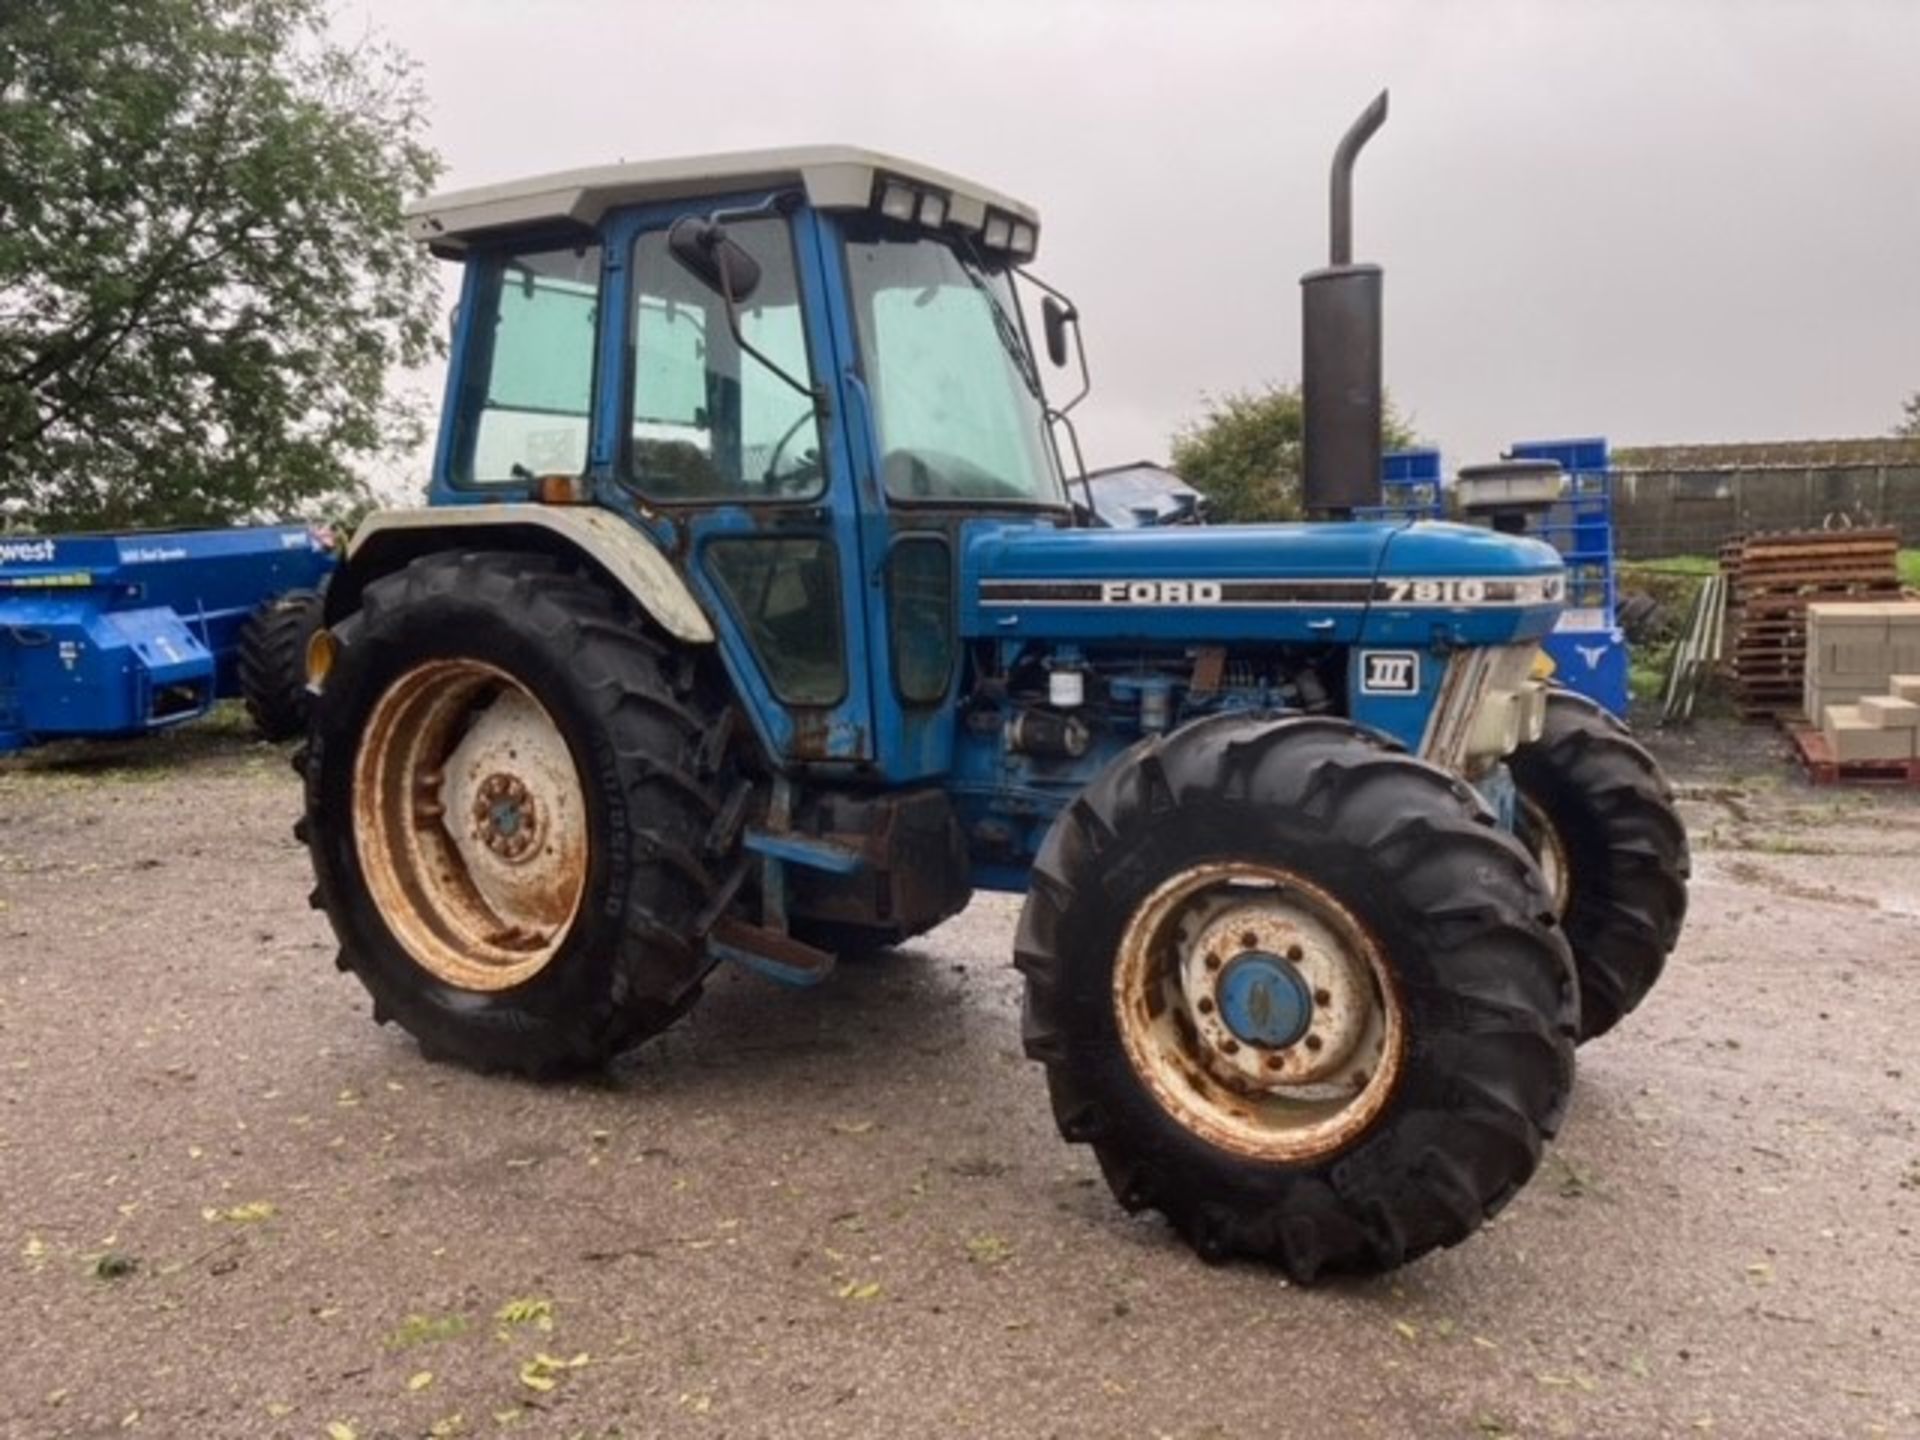 FORD 7810 SERIES 3 TRACTOR